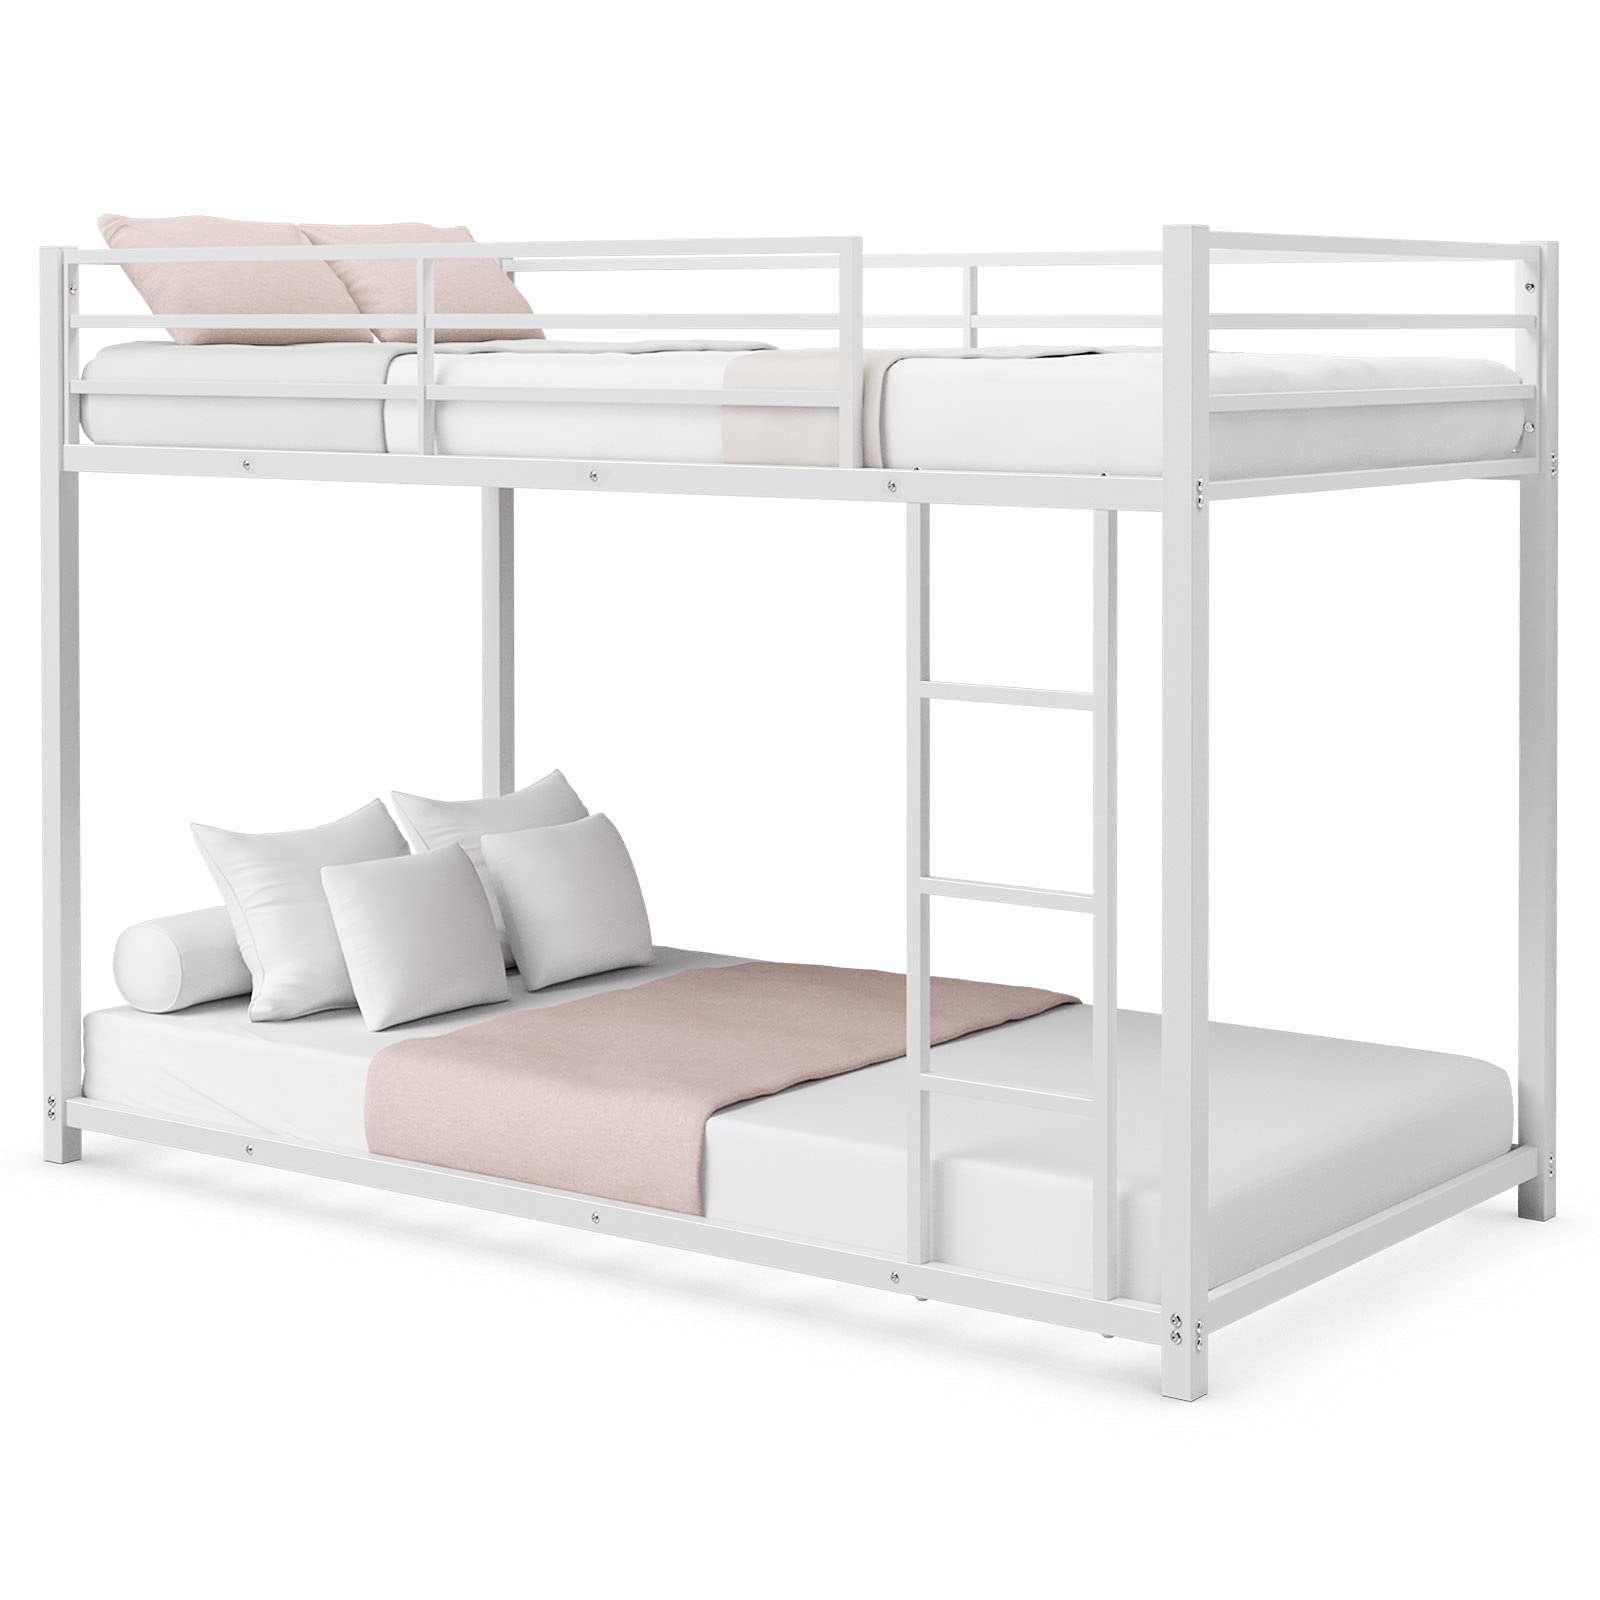 Classic Bunk Bed Frame with Safety Guard Rails & Side Ladder